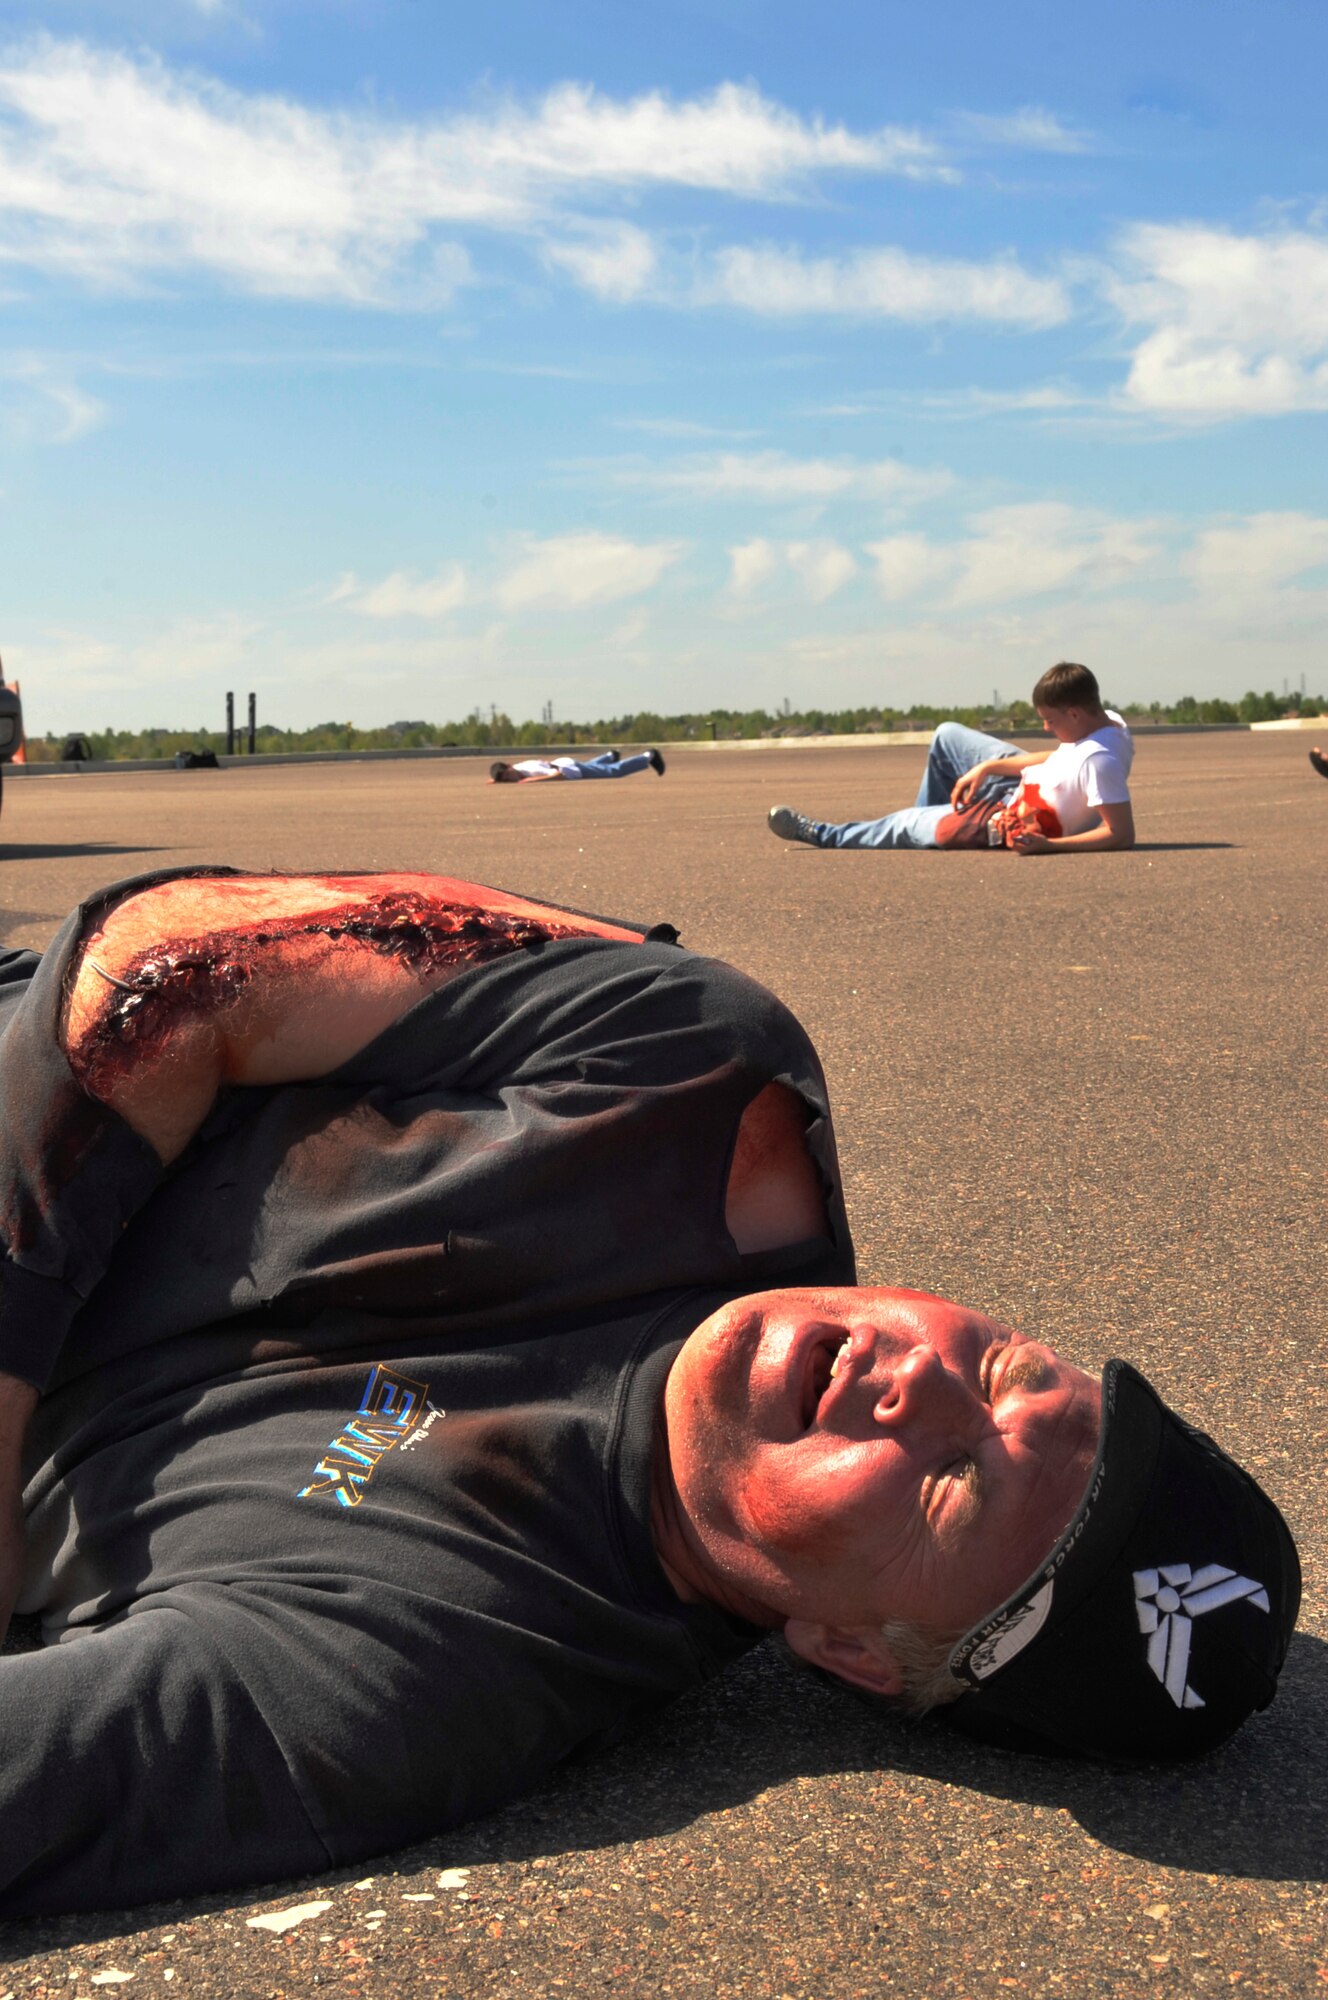 BUCKLEY AIR FORCE BASE, Colo. -- Douglas Carroll, 460th Space Wing director of staff, volunteers as a victim of a mock terrorist attack during an All-Hazards Response Training exercise May 21. All "casualties" were evaluated and cared for by Buckley emergency responders. (U.S. Air Force photo by Airman 1st Class Paul Labbe)